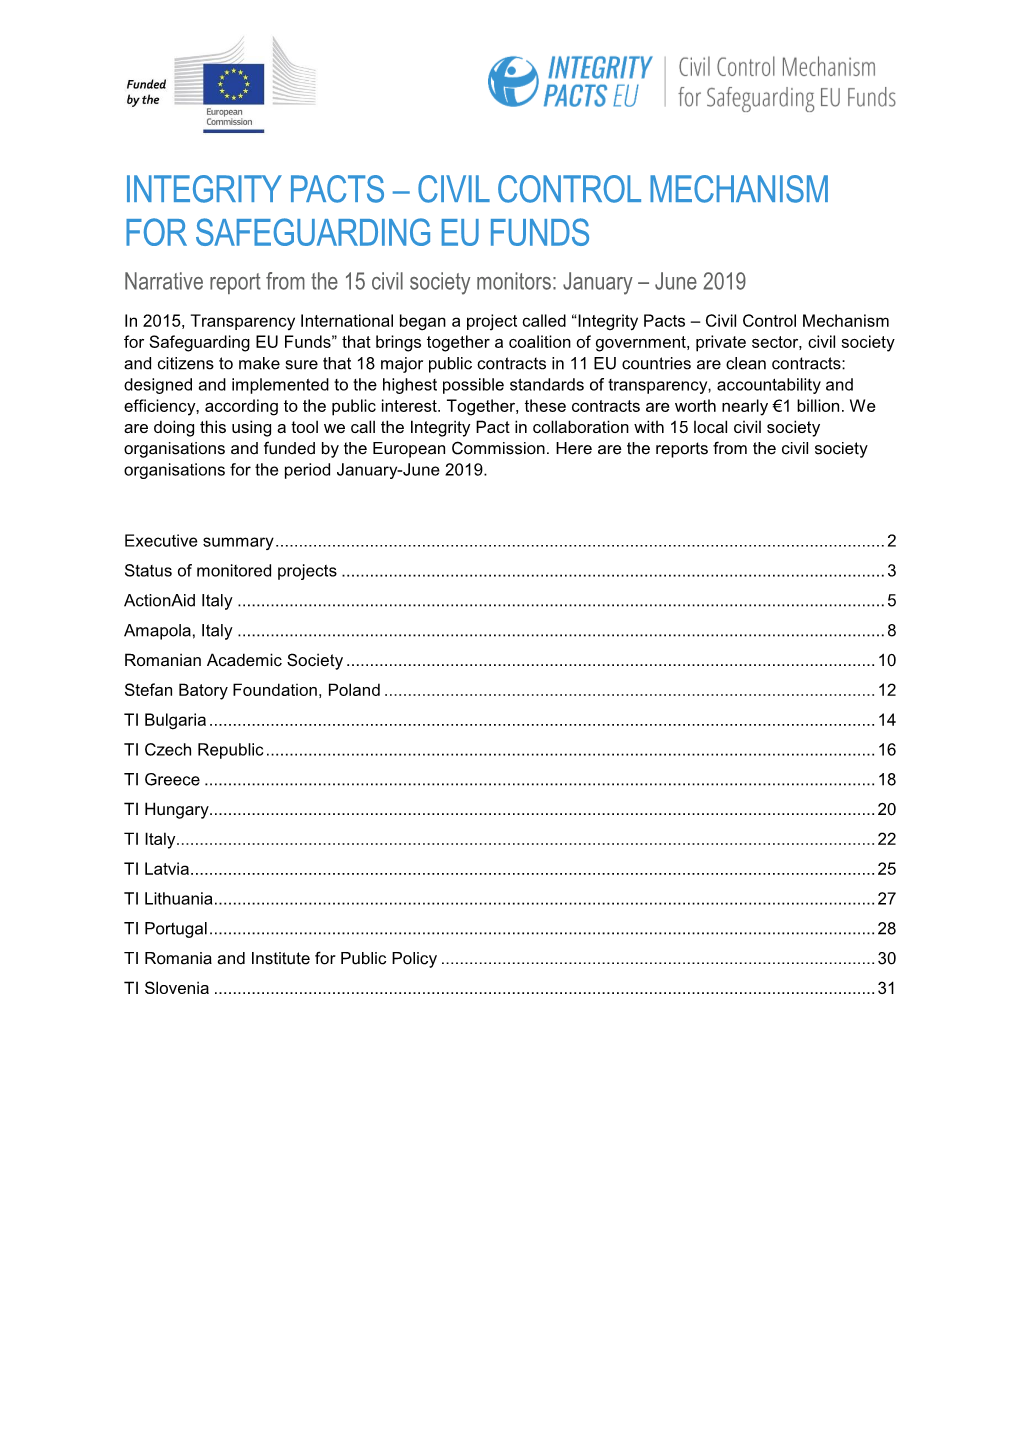 INTEGRITY PACTS – CIVIL CONTROL MECHANISM for SAFEGUARDING EU FUNDS Narrative Report from the 15 Civil Society Monitors: January – June 2019